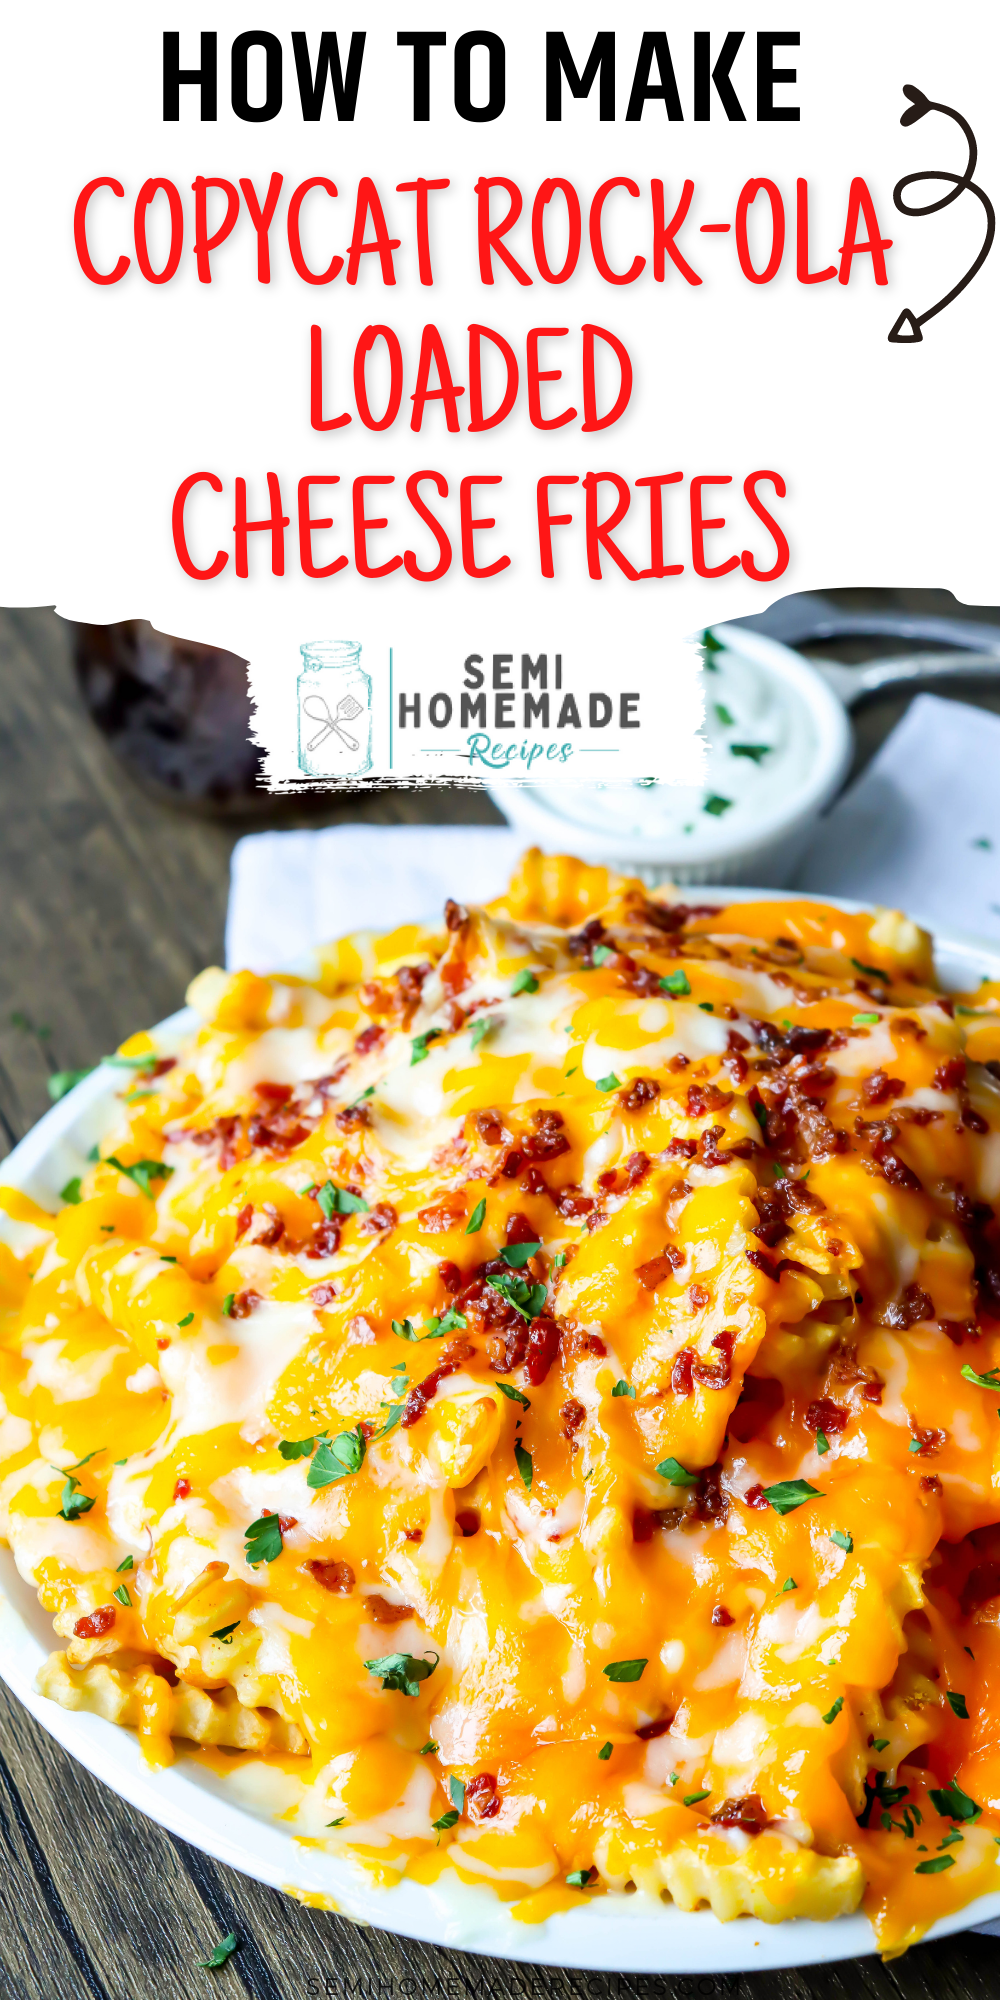 These CopyCat Rock-ola Loaded Cheese Fries are easy to make and you're going to love them! Crinkle fries smothered in grated cheddar and monterey jack cheese, topped with bacon! Perfect with a side of ranch! 